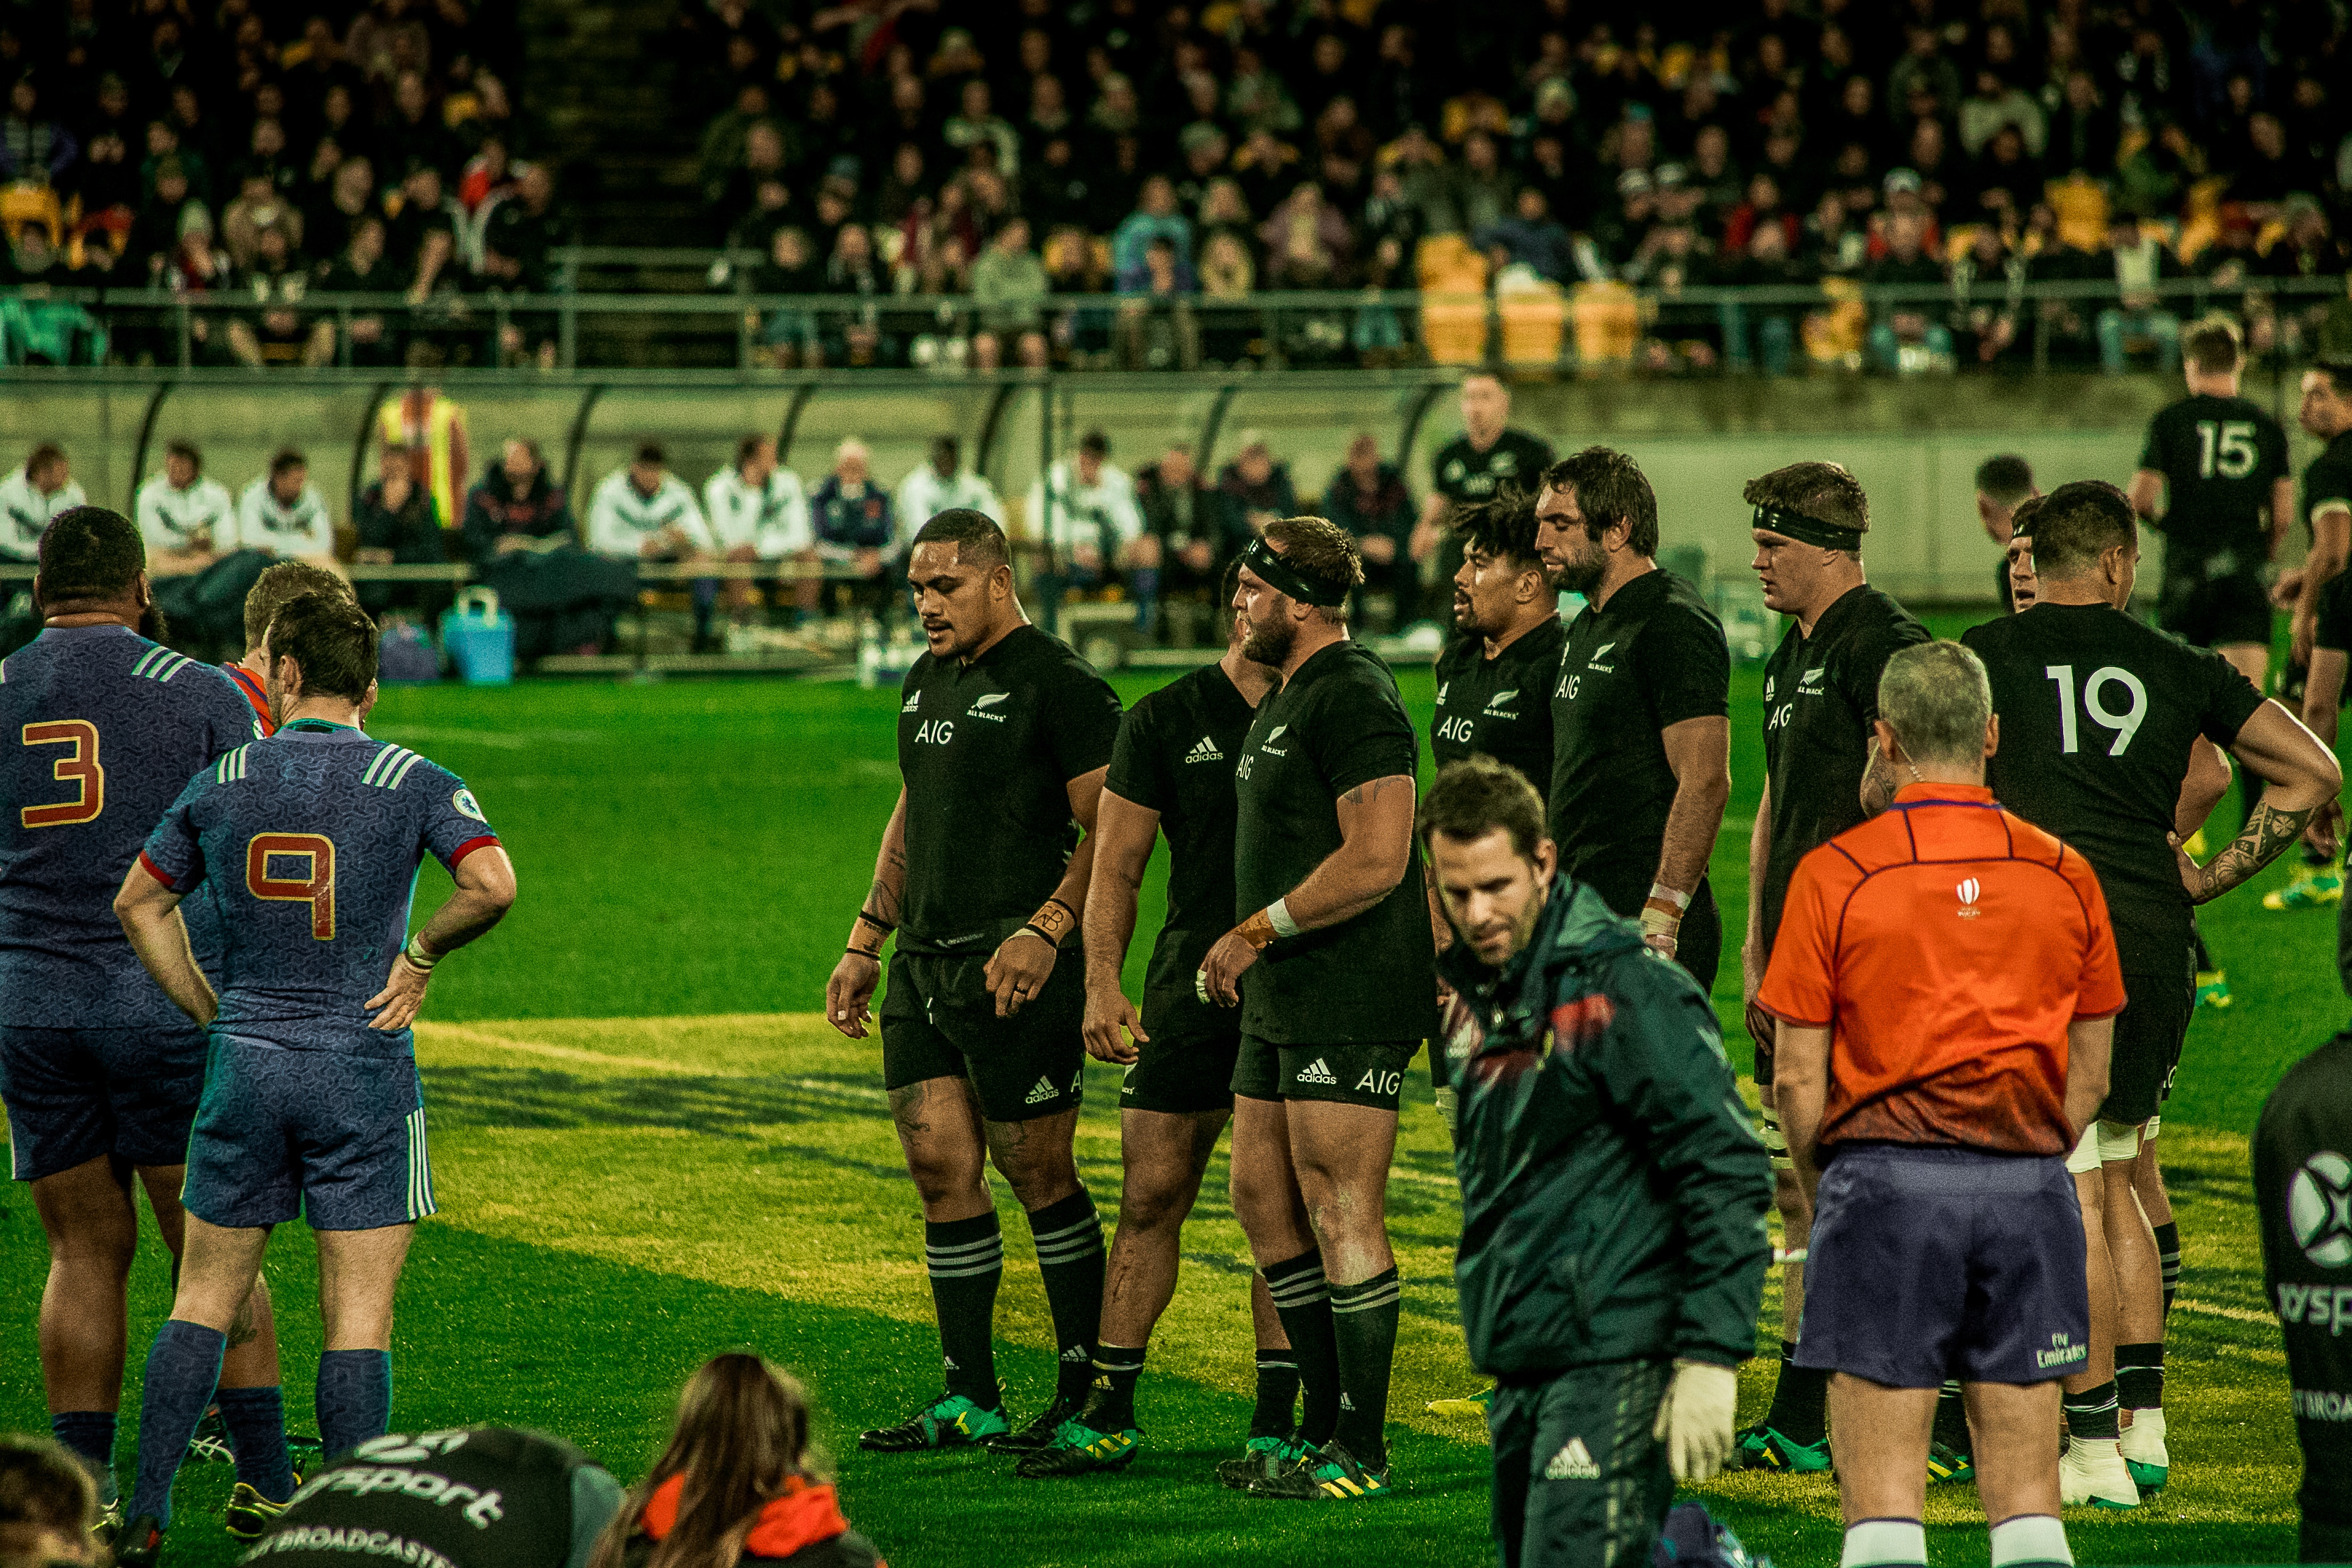 RBNZ prepare to scrum down for next play